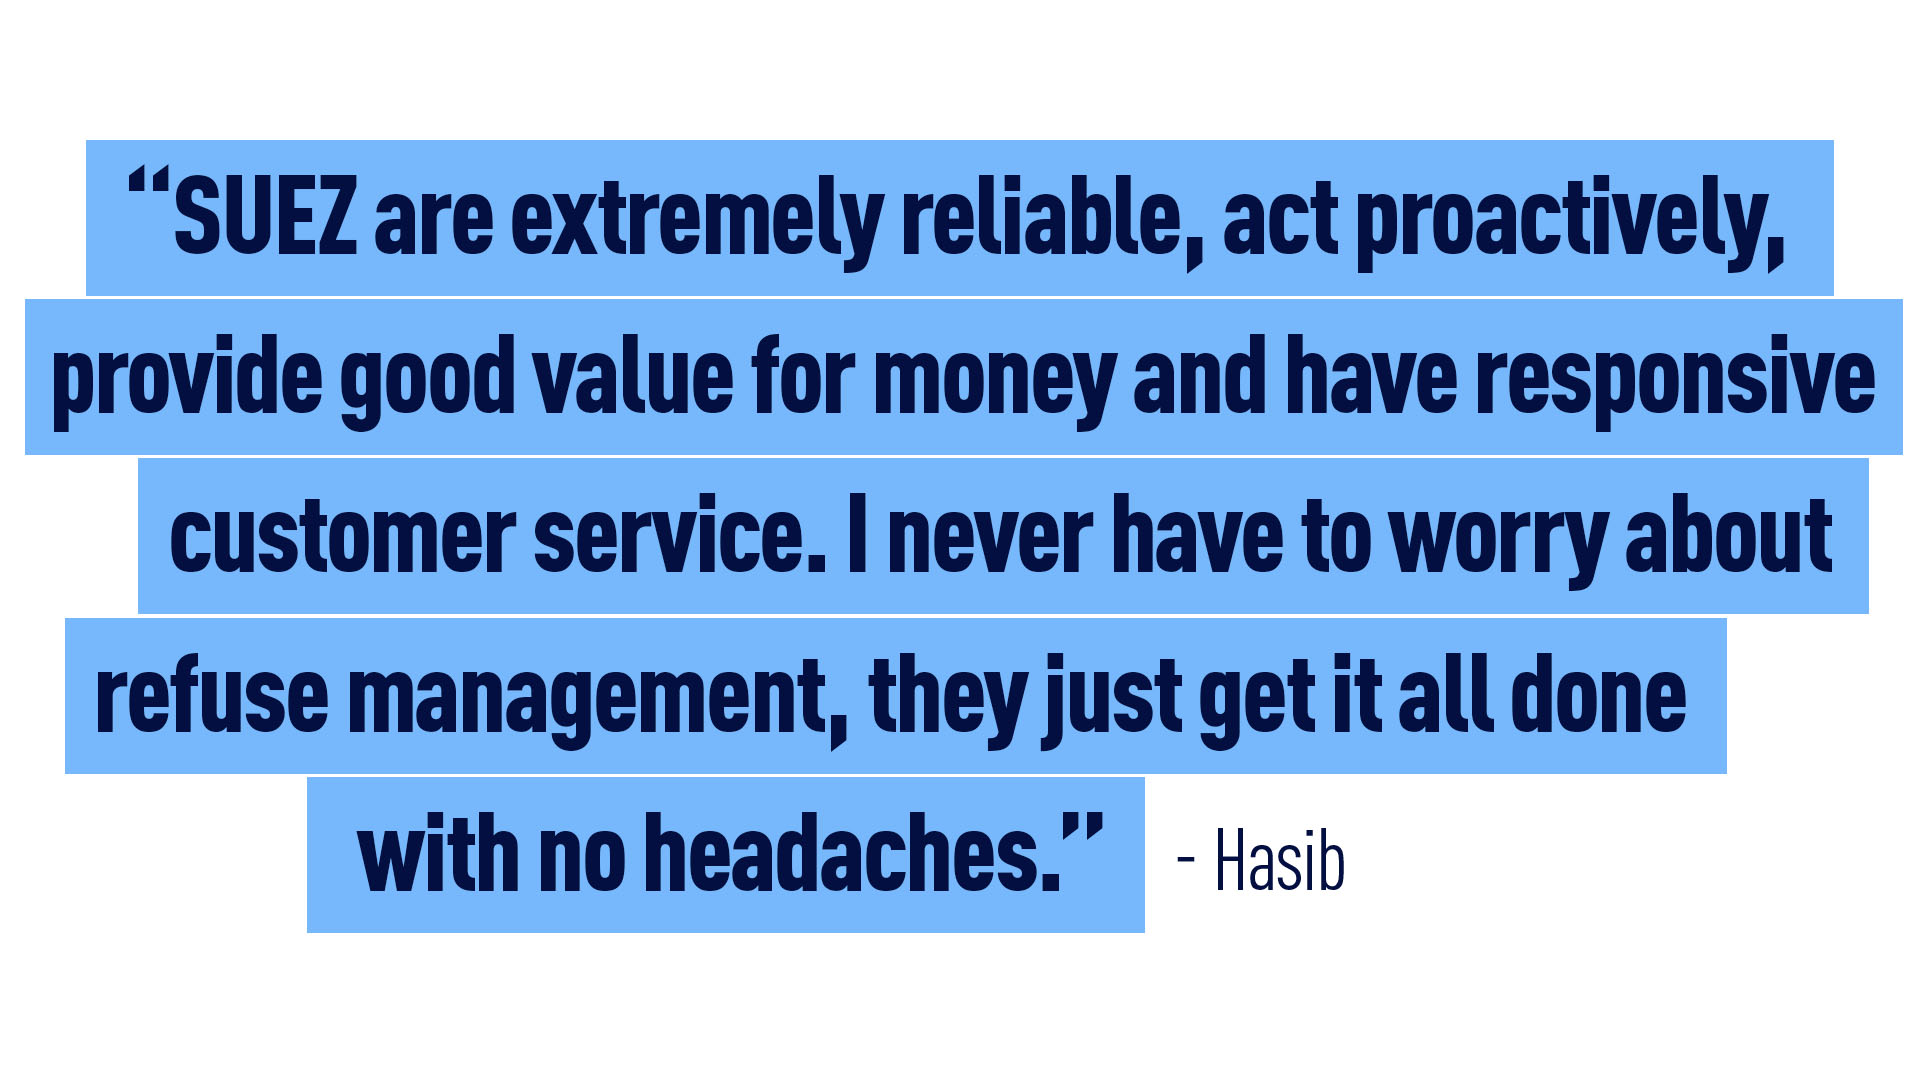 Hasib – “SUEZ are extremely reliable, act proactively, provide good value for money and have responsive customer service. I never have to worry about refuse management, they just get it all done with no headaches.”